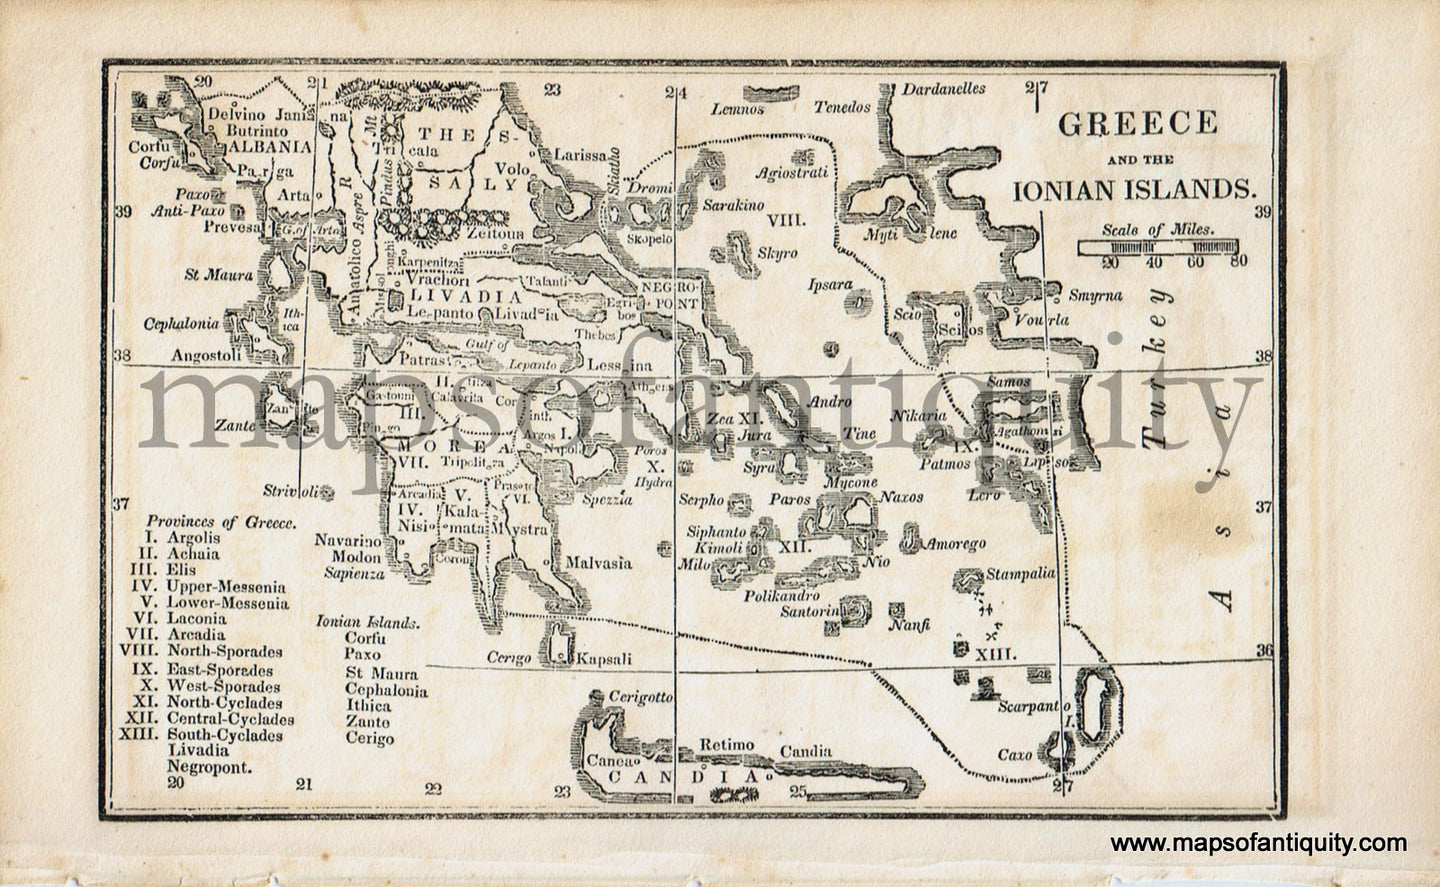 Antique-Black-and-White-Map-Greece-and-The-Ionian-Islands-Europe-Greece-&-the-Balkans-1830-Boston-School-Geography-Maps-Of-Antiquity